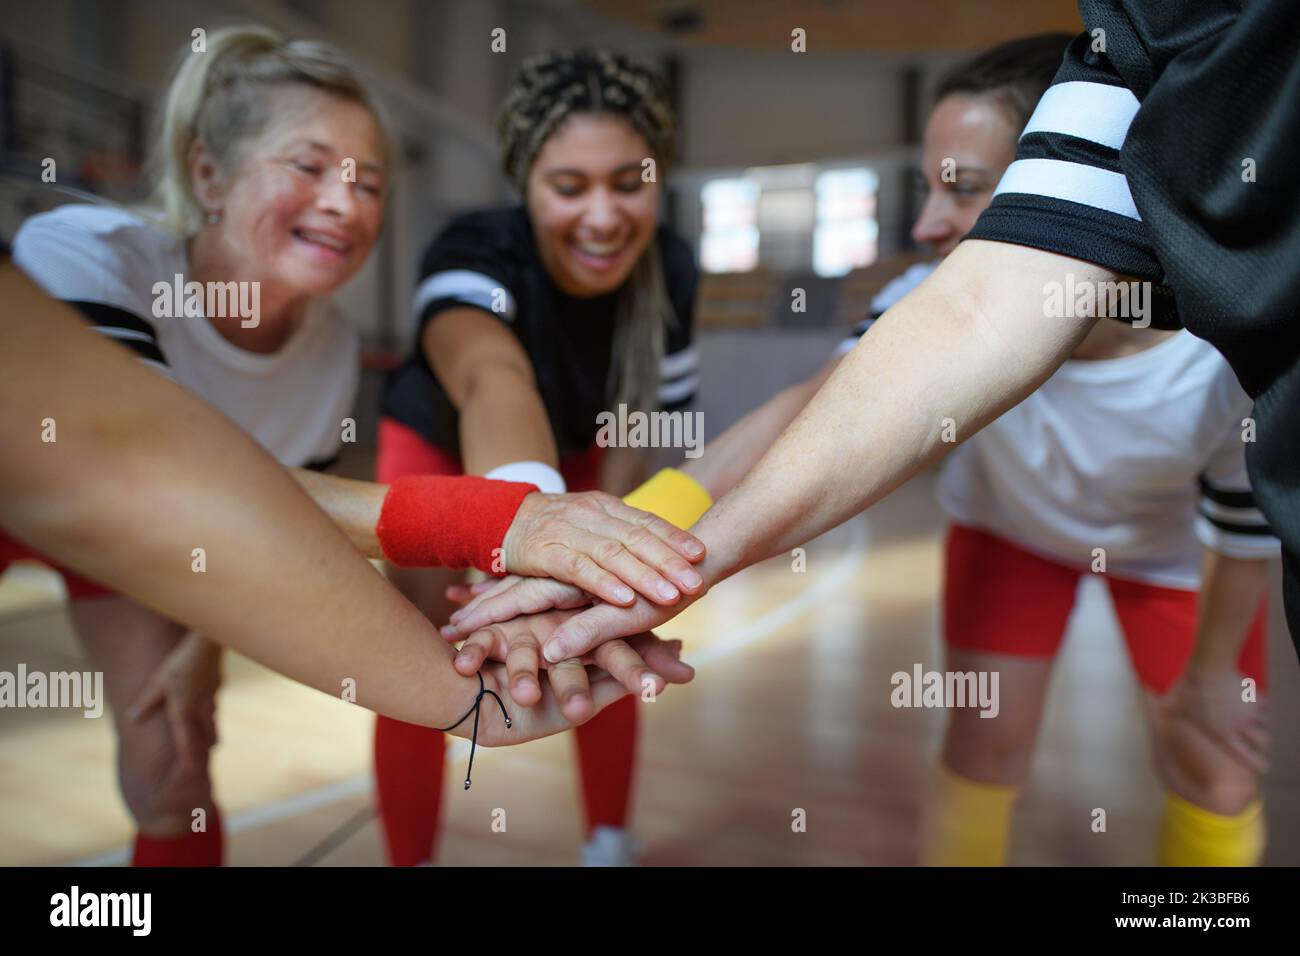 Group of young and old women in gym stacking hands together, sport team players. Stock Photo